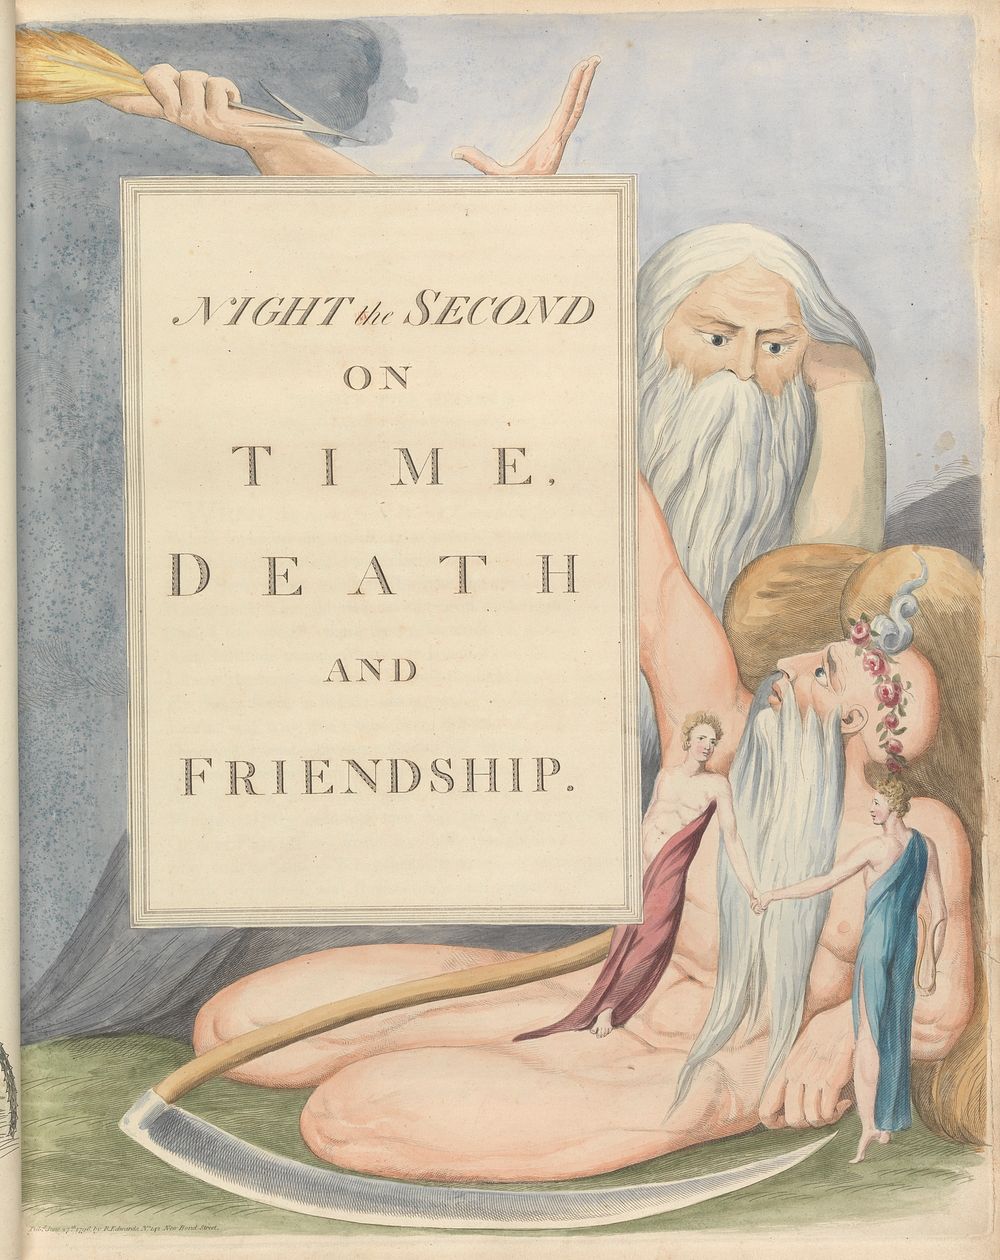 Young's Night Thoughts, Page 17, "Night the Second, On Time, Death and Friendship." by William Blake.